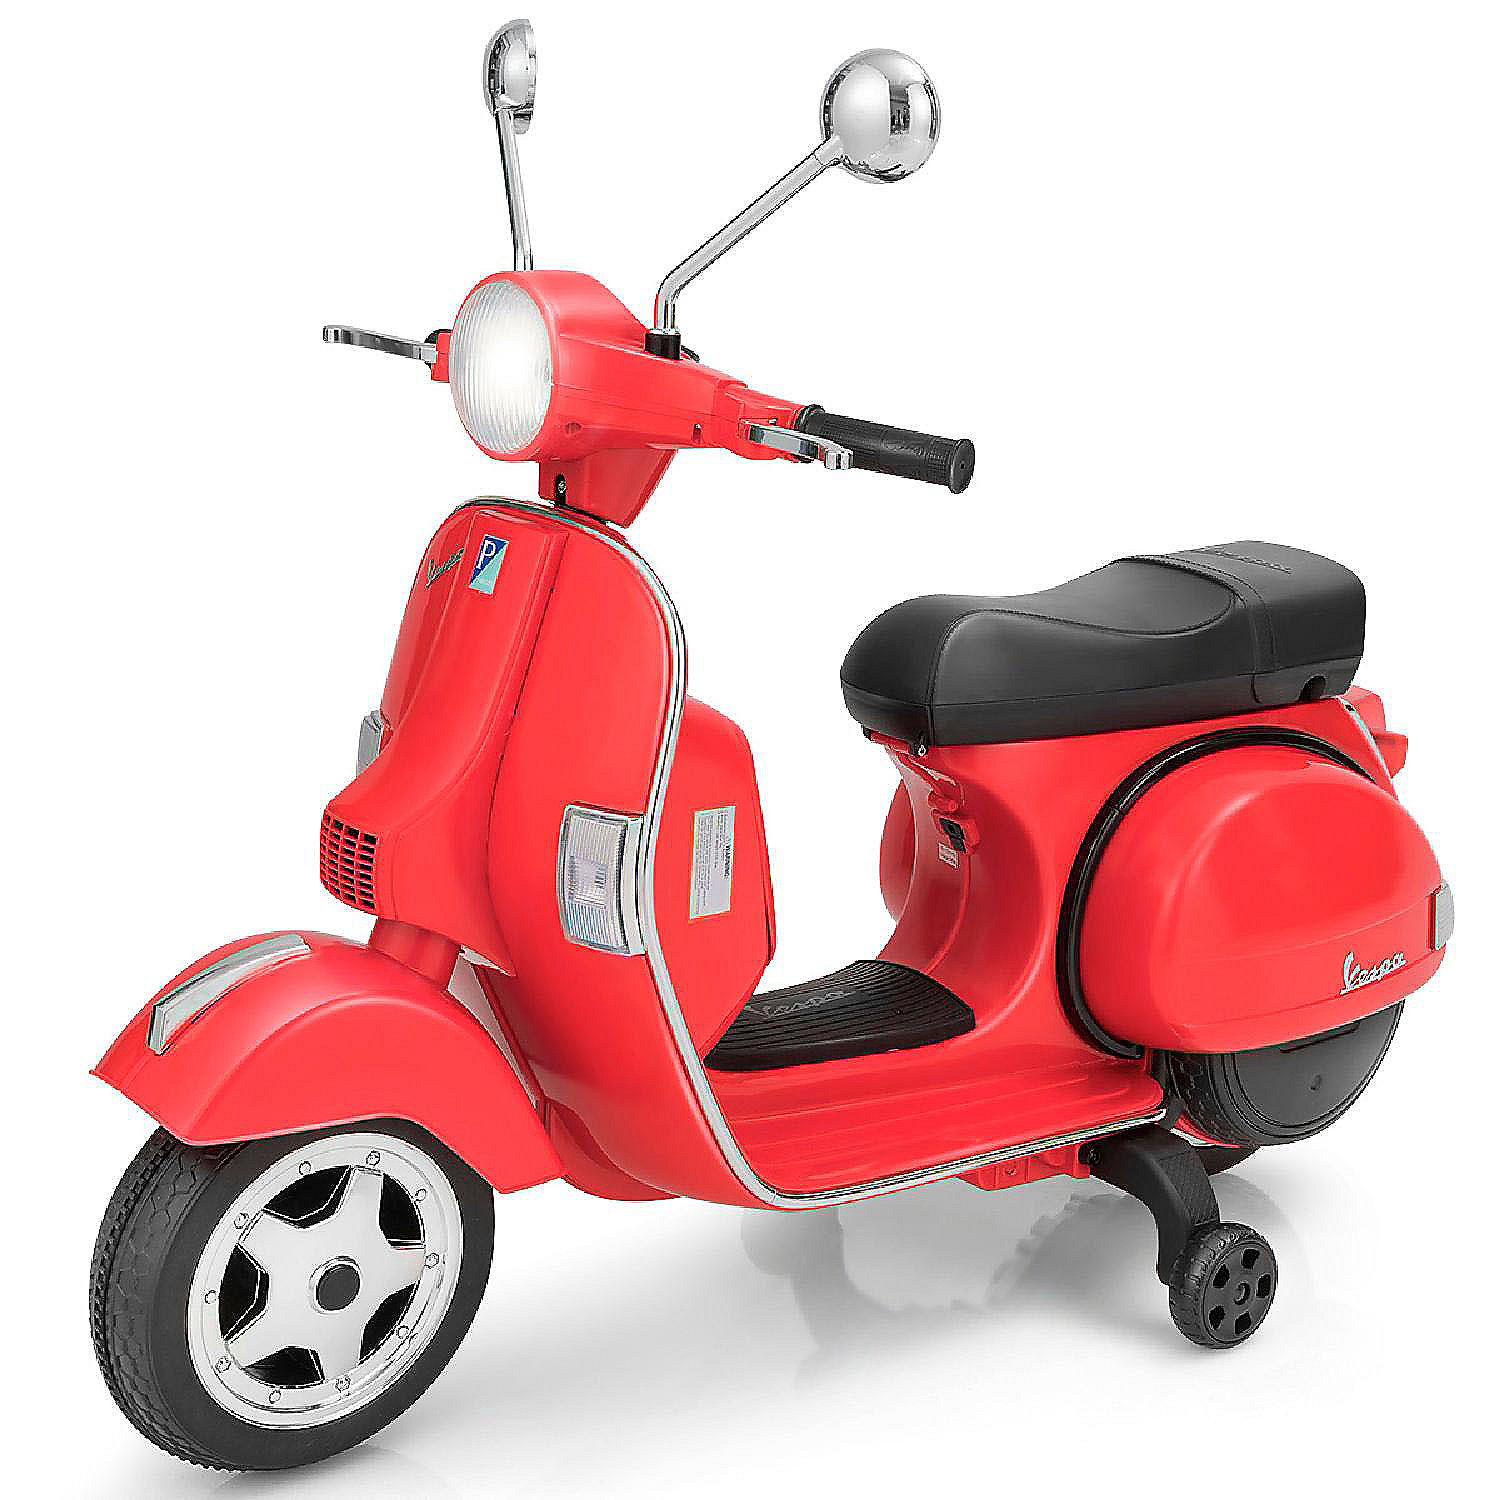 Costway Kids Vespa Scooter 6V Ride On Motorcycle Wheels Red | Oriental Trading